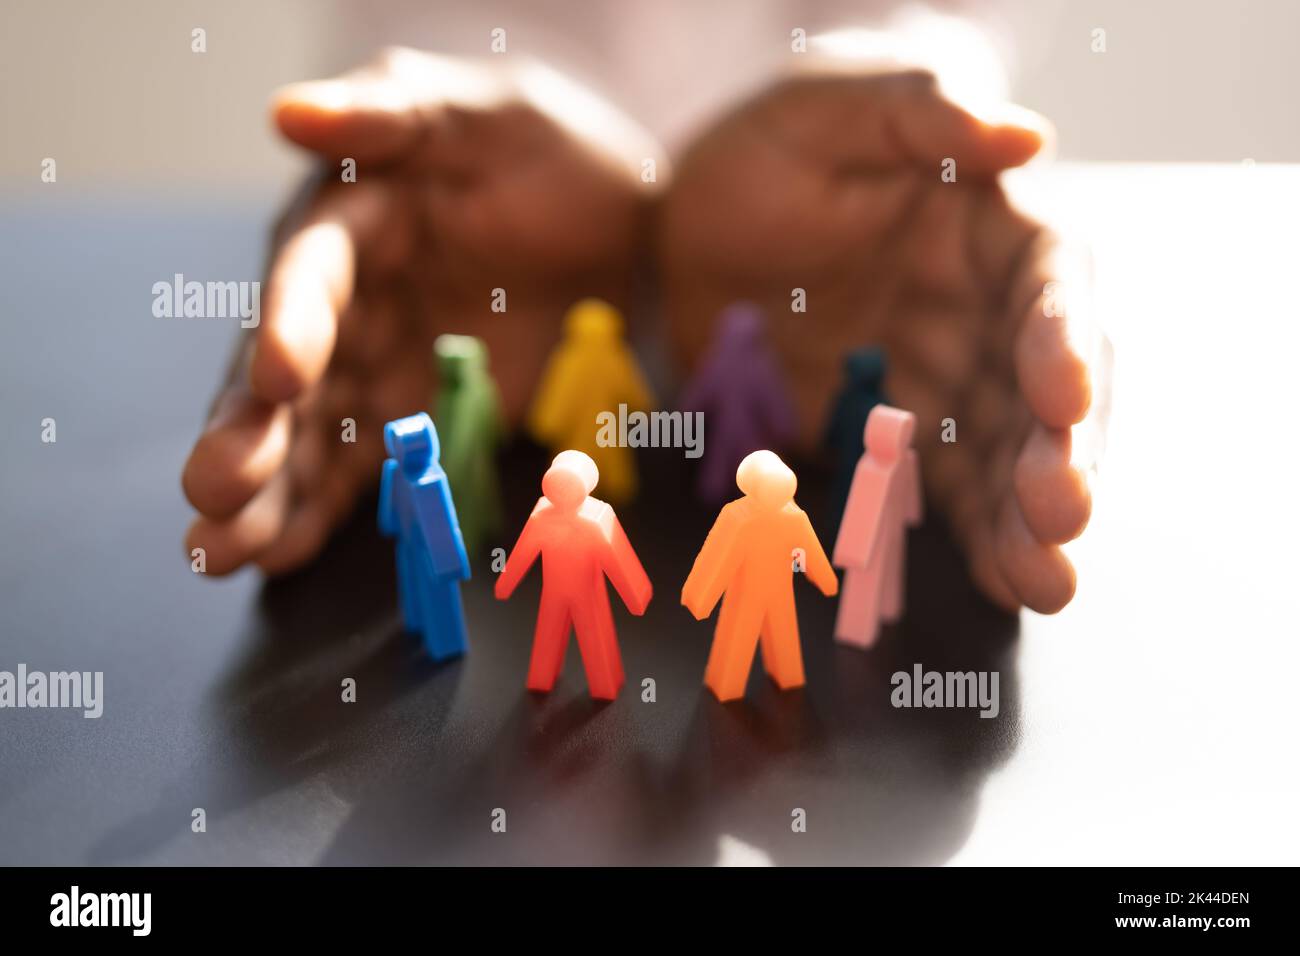 Inclusion And Diversity. Hand Protecting Inclusive Equal Pawns Stock Photo